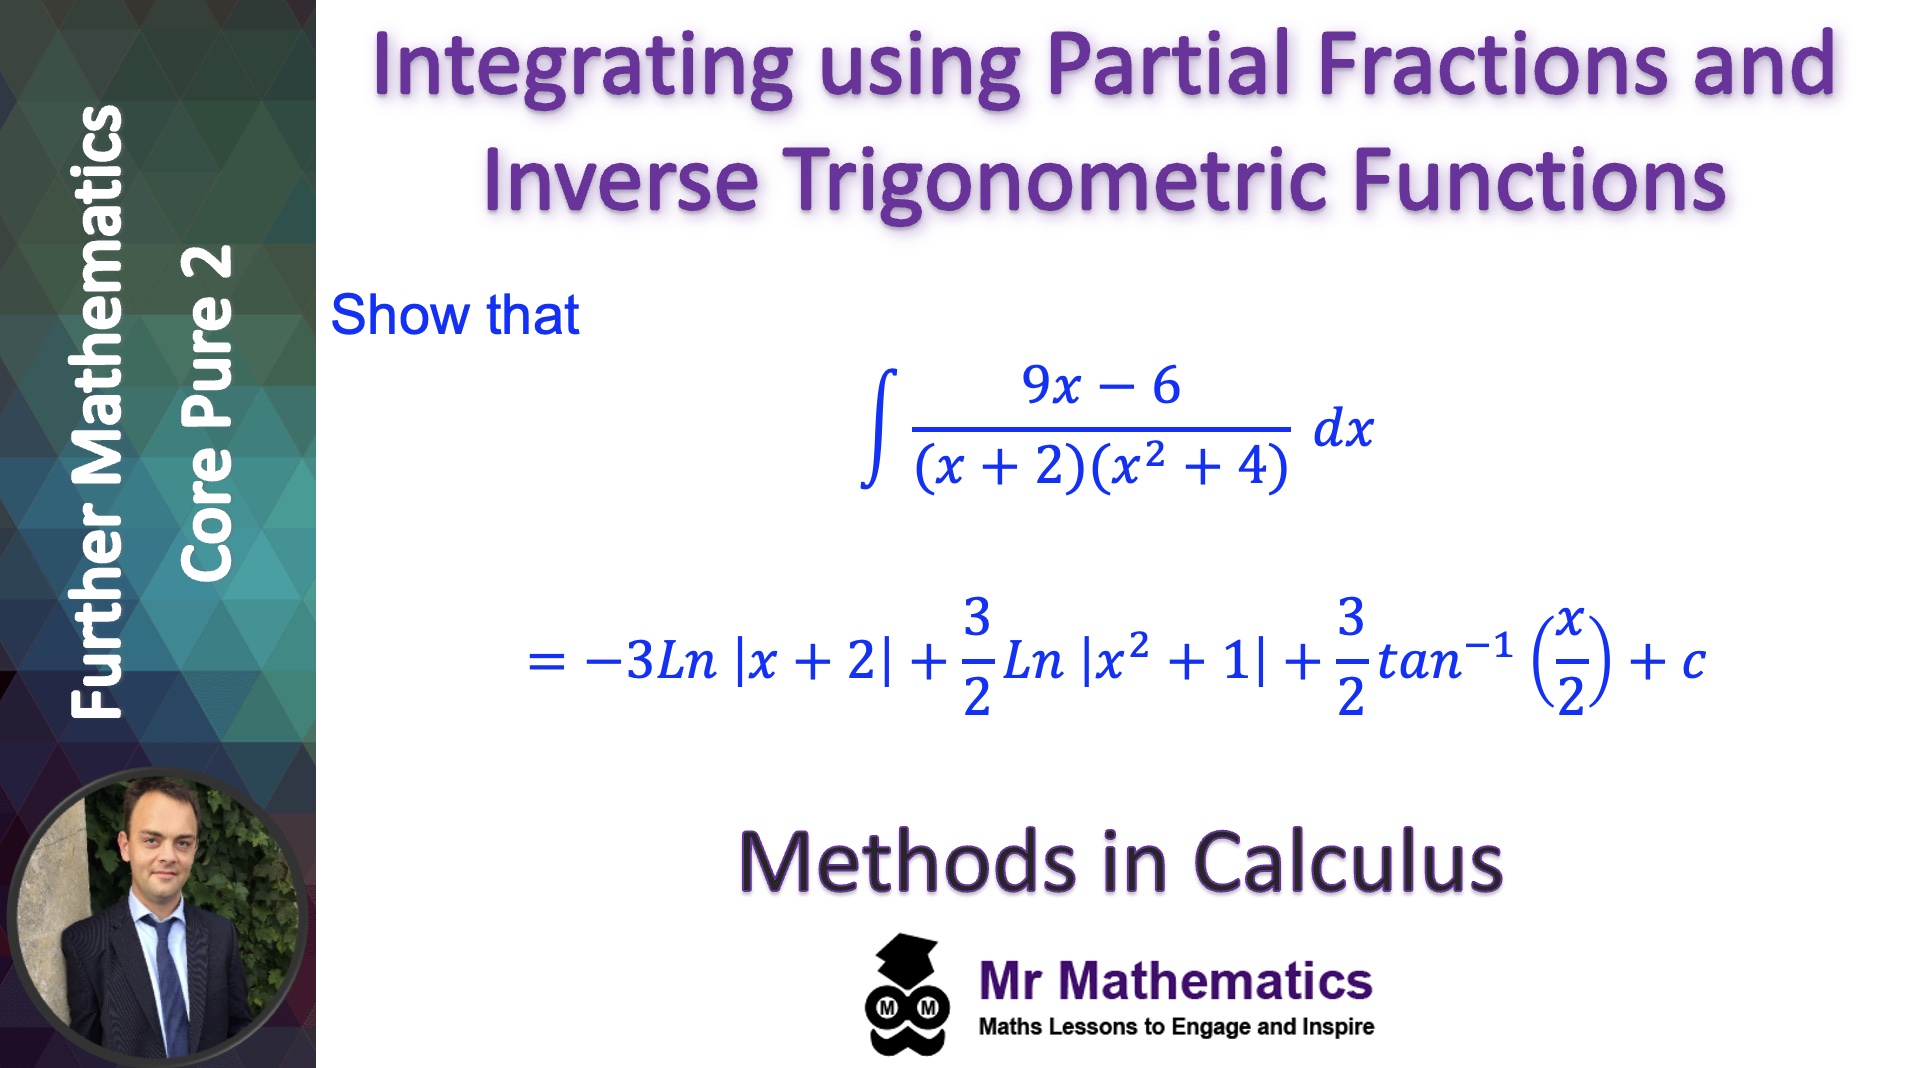 Integration with Partial Fractions and Inverse Trigonometric Functions